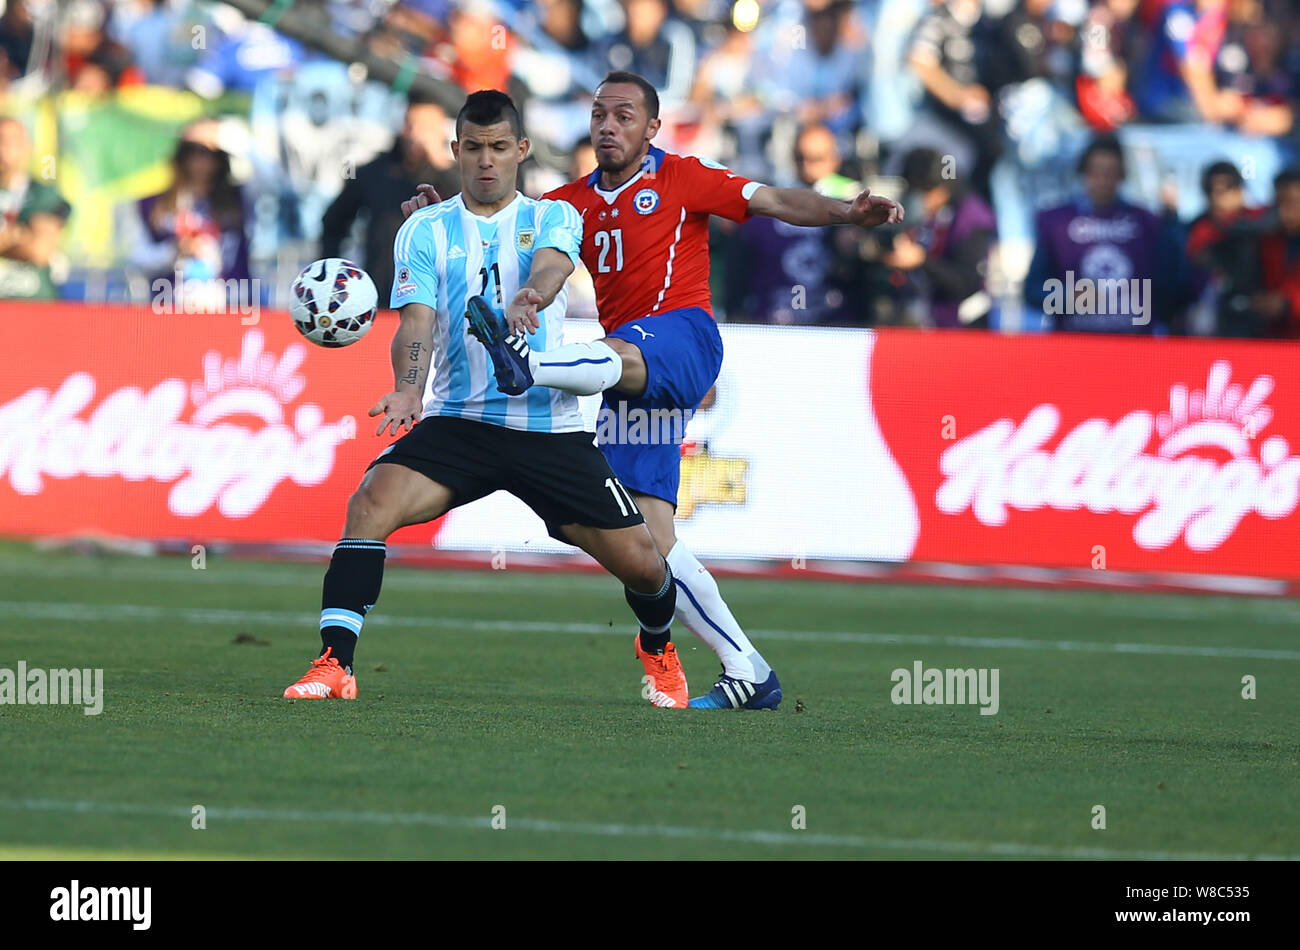 Argentina's Sergio Aguero, left, challenges Chile's Marcelo Diaz, right, during the Copa America 2015 final soccer match between Chile and Argentina a Stock Photo